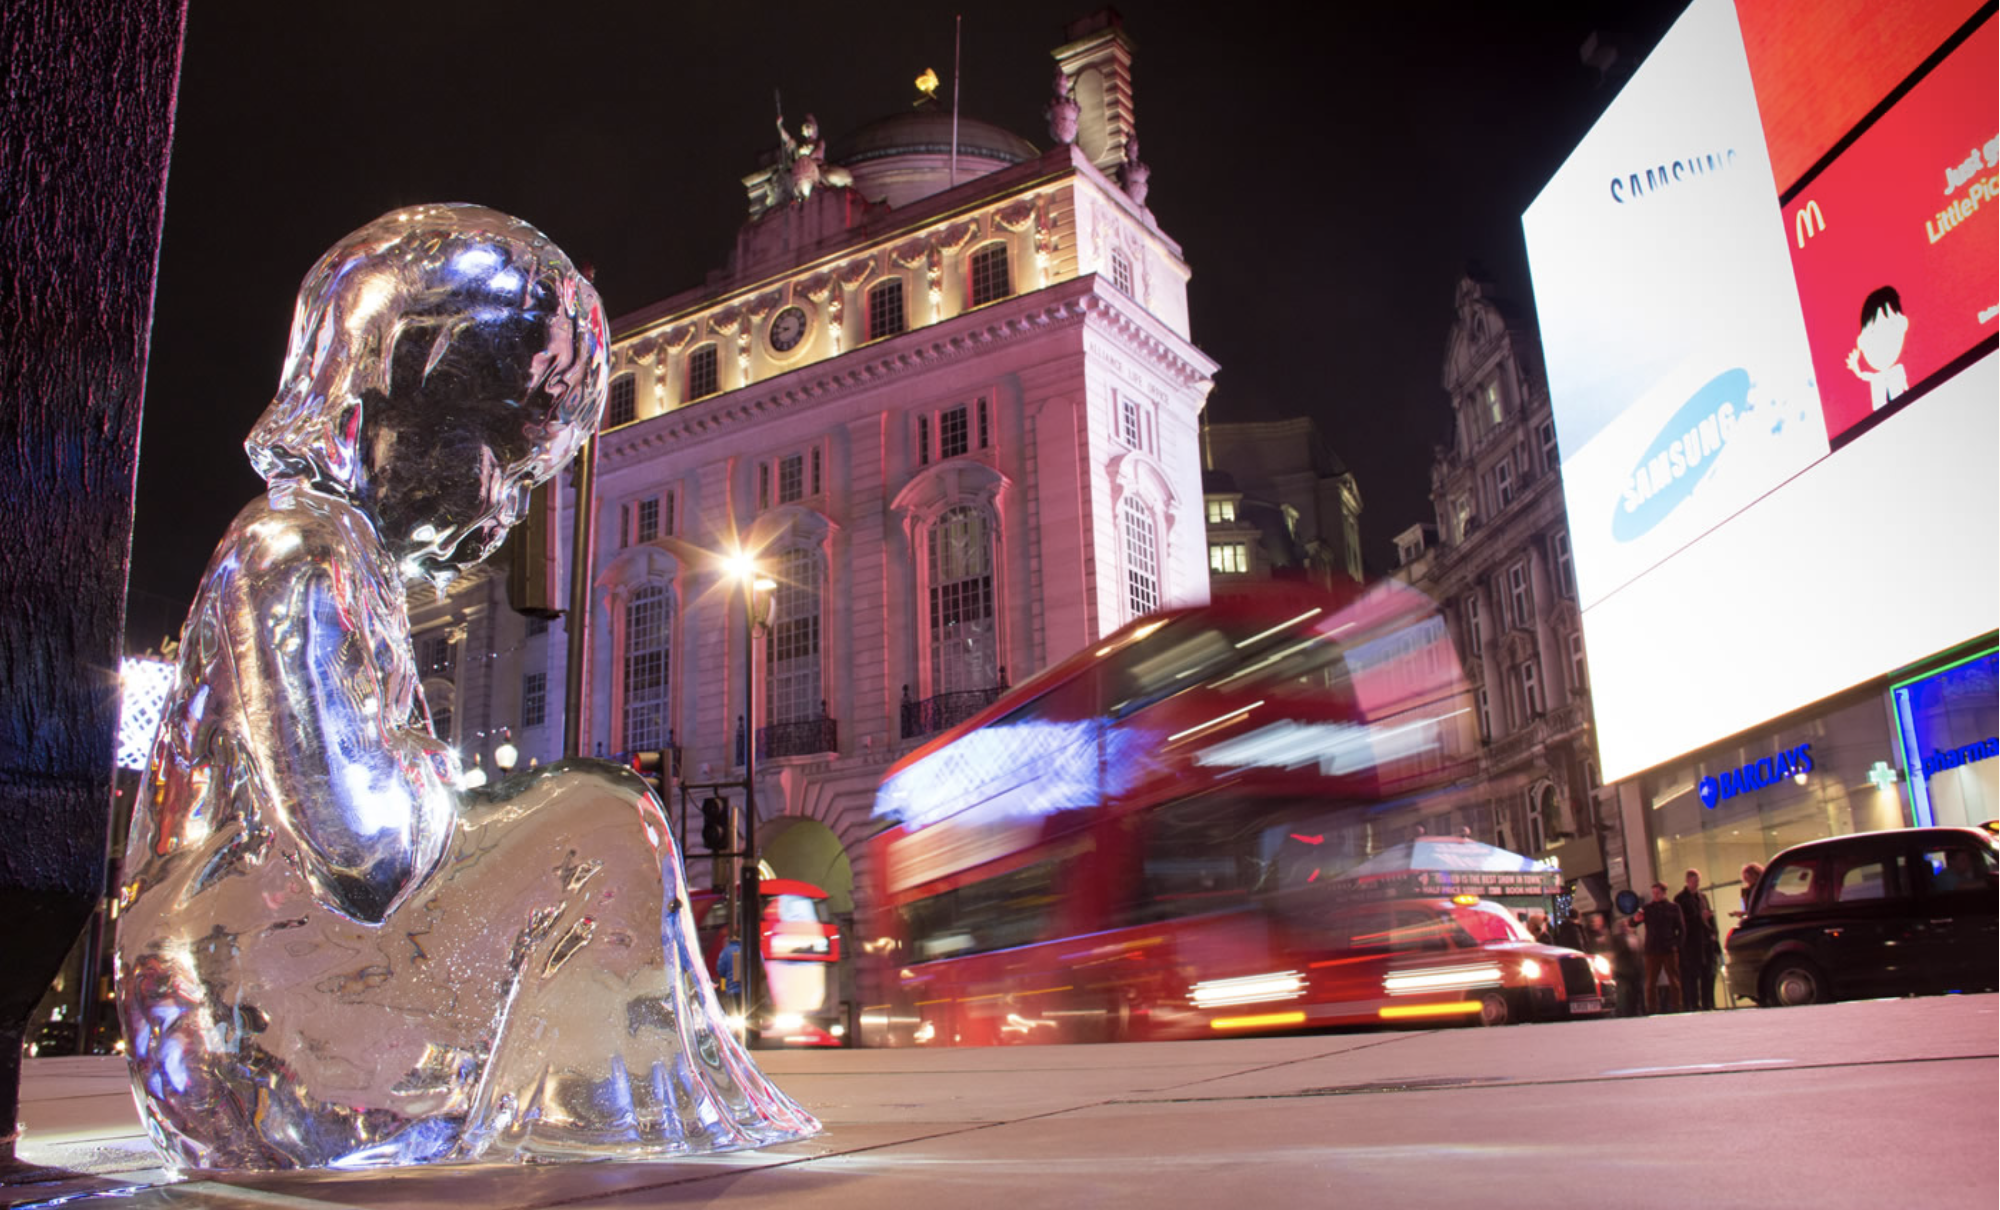 #PleaseLookAfterMe. Placing the ice sculptures around England